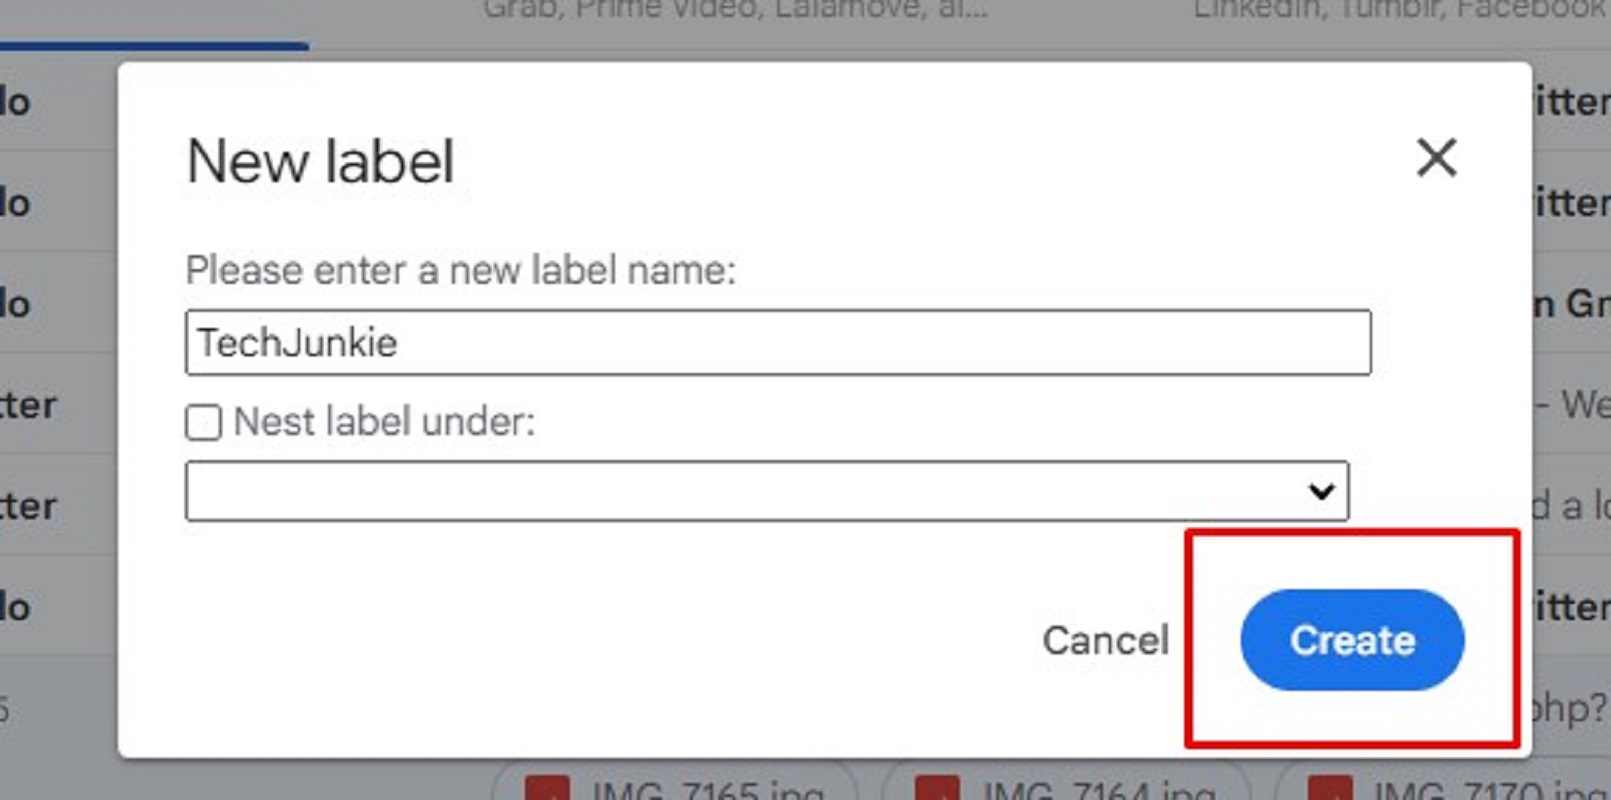 Gmail website - creating labels